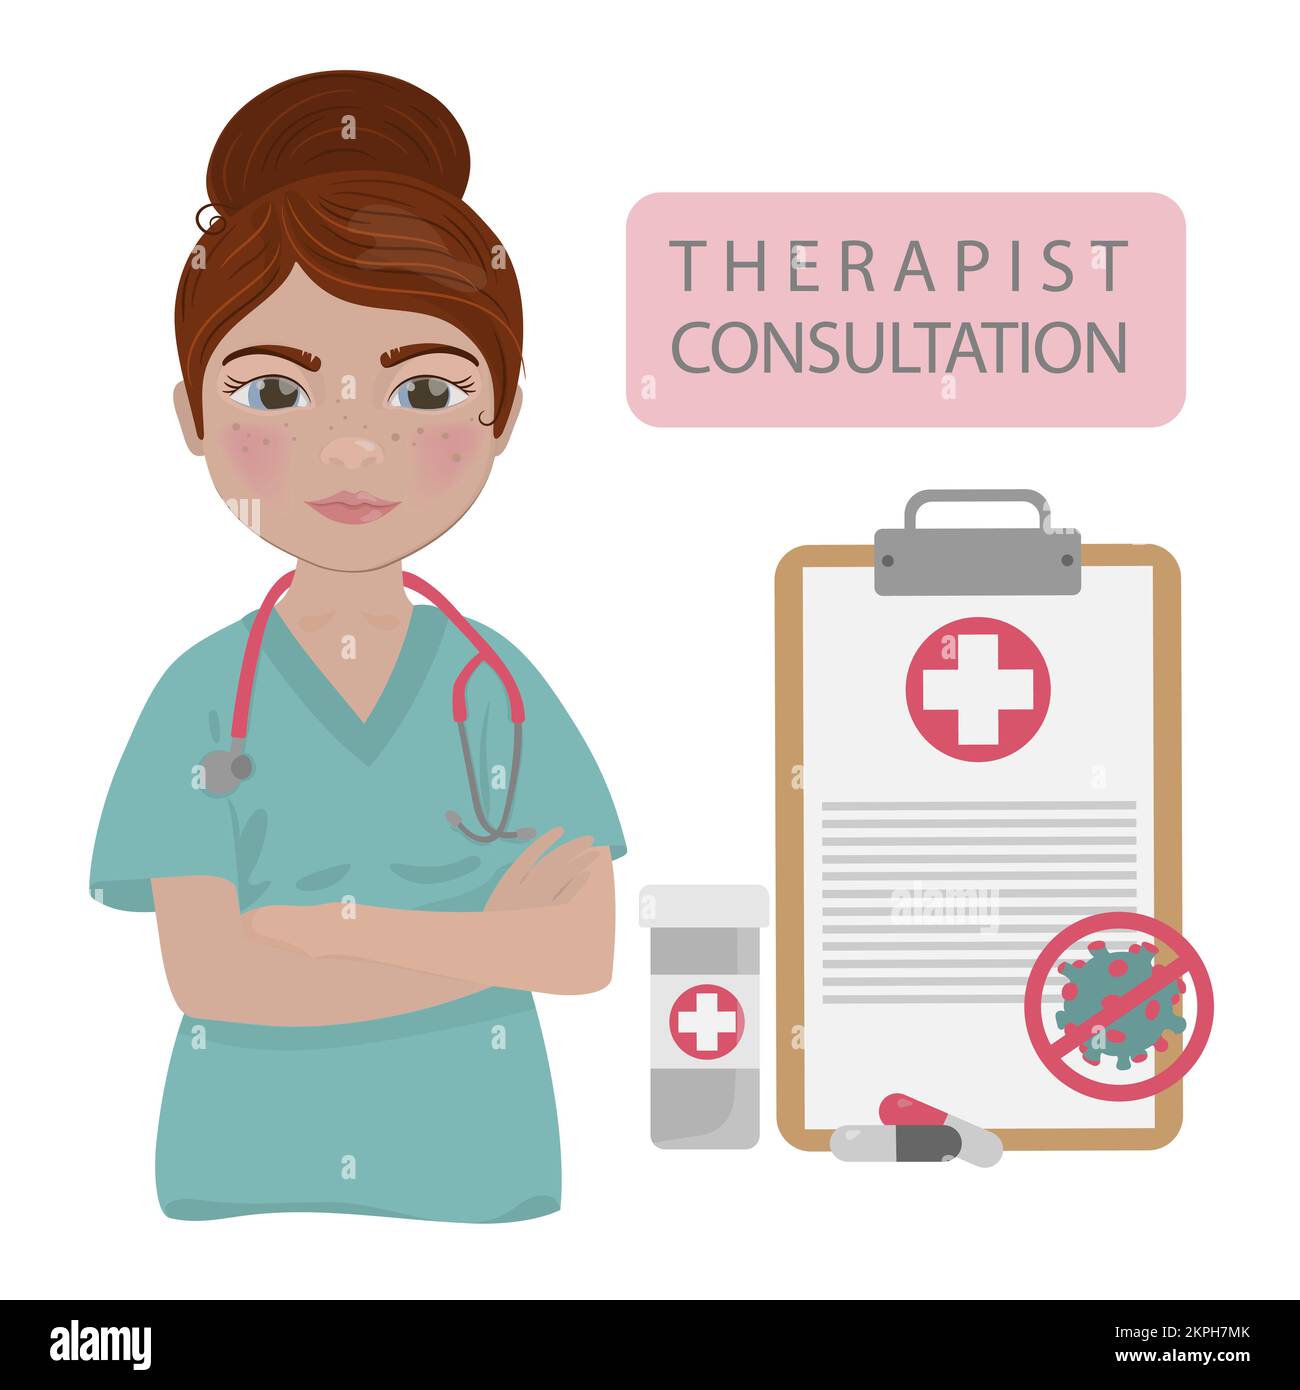 THERAPIST CONSULTATION Practicing Woman Doctor With Stethoscope Gives Online Recommendations Fighting Coronovirus Infection Clip Art Vector Illustrati Stock Vector